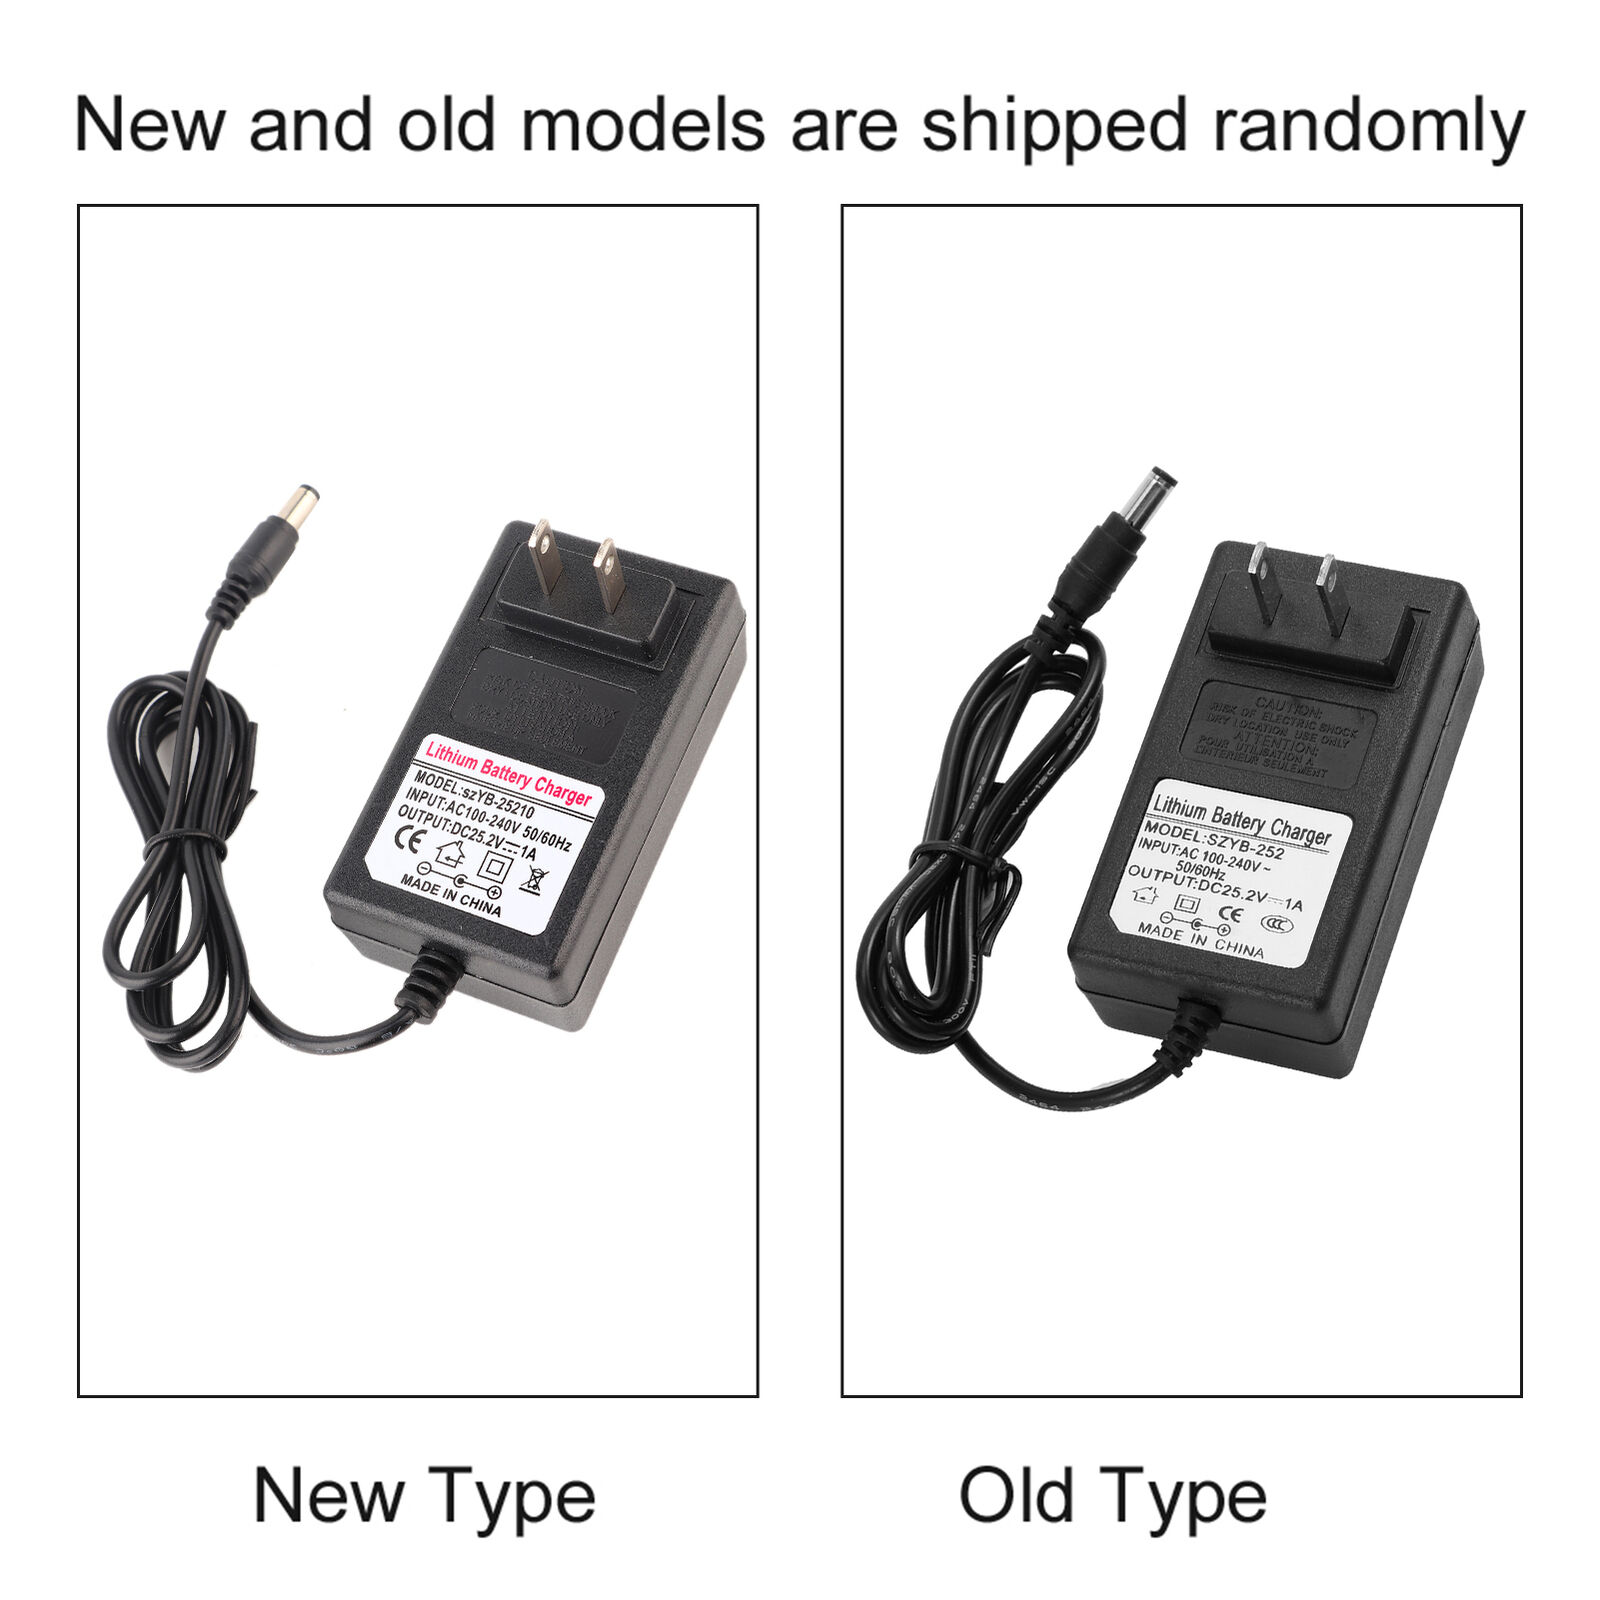 DC 25.2V 1A Battery Charger Power Supply Charging Adapter For Headlights Car Toy Brand: Unbranded Compatible Brand: U